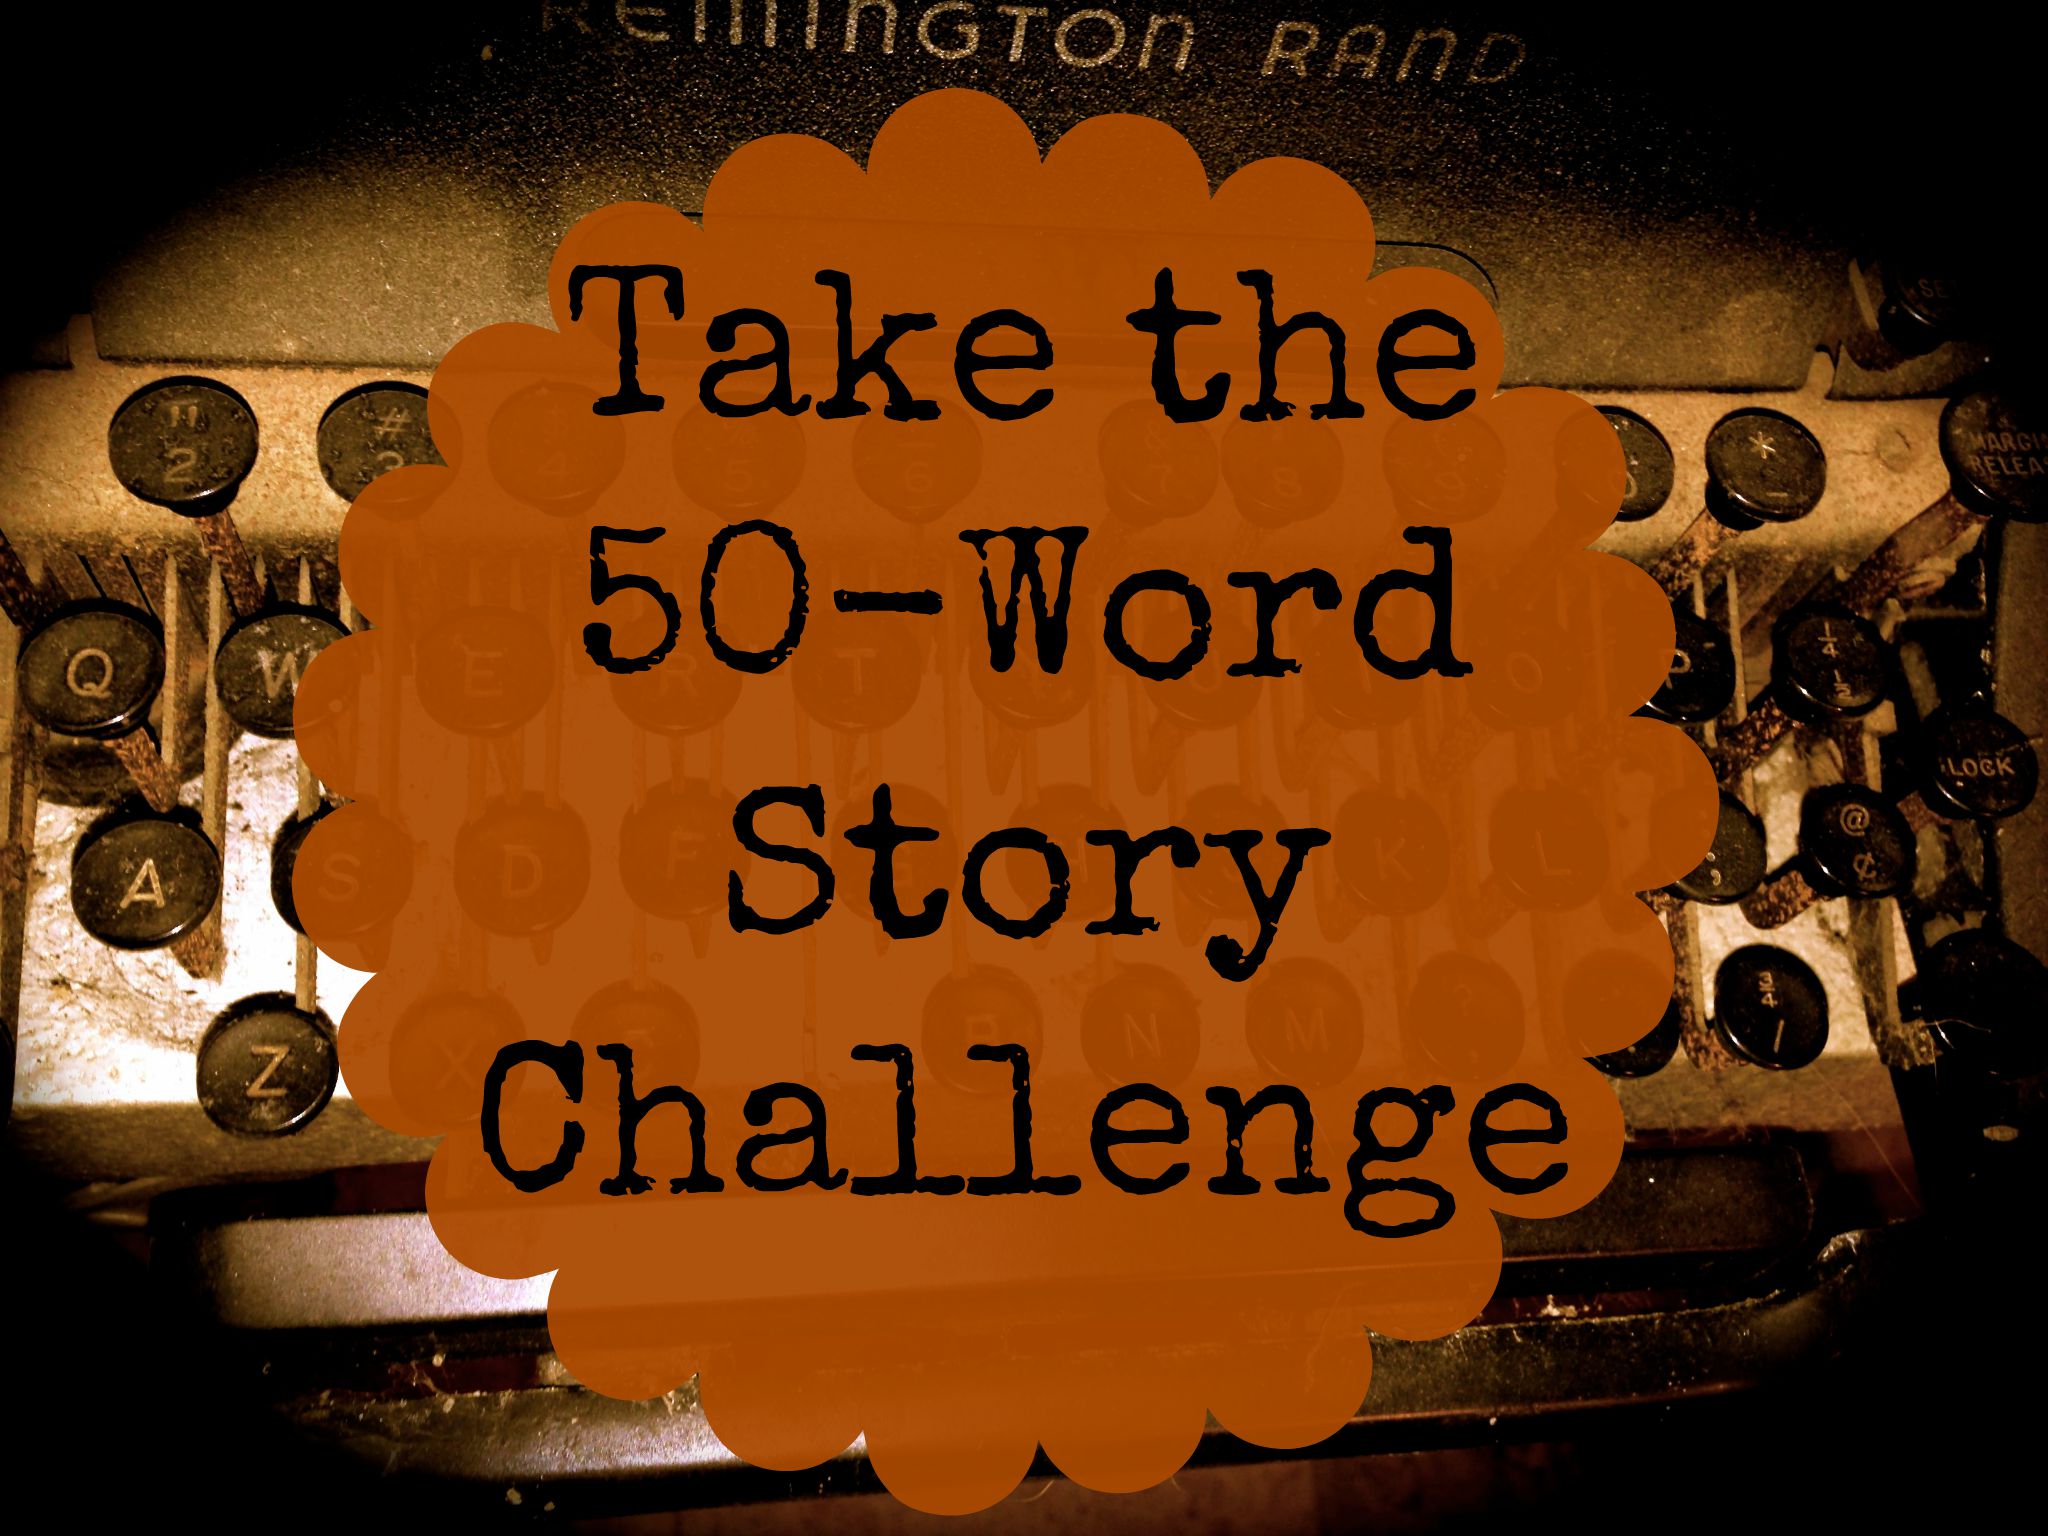 50 stories. Story Word. 50 Words stories. Stories Challenge. Fifty Word story.